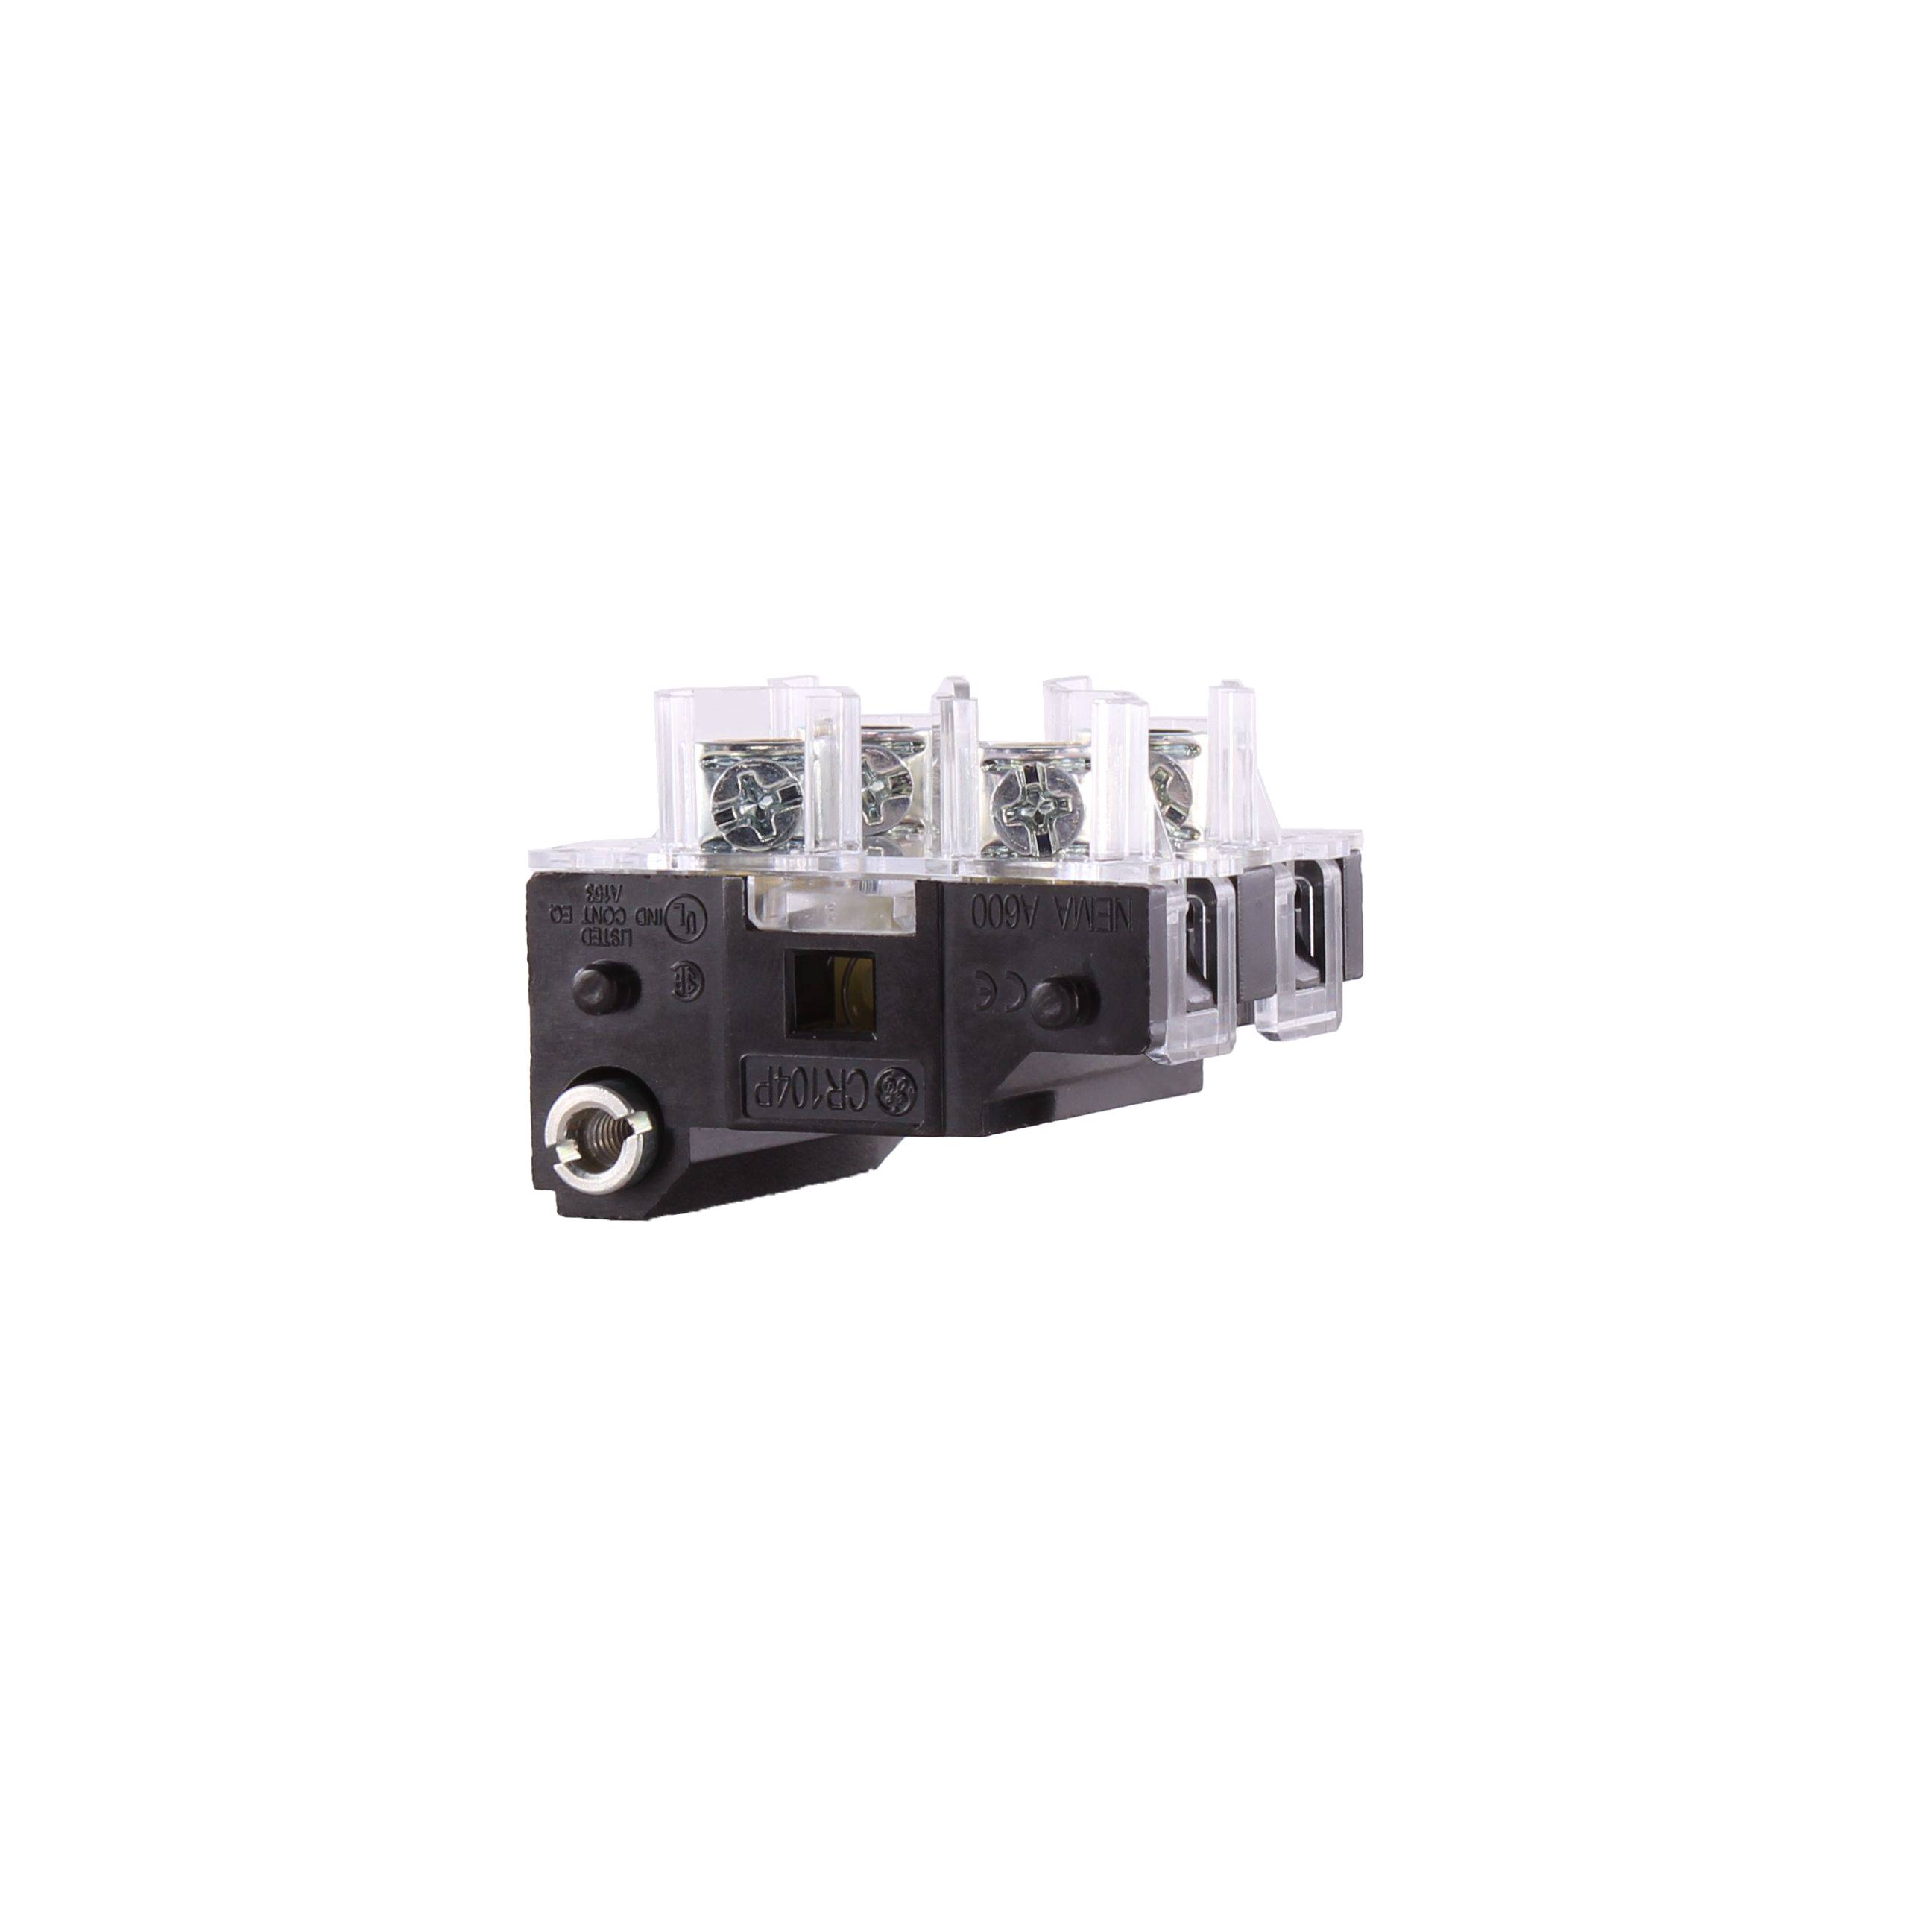 GE CR104PXC91 Standard Contact Block, 30.5 mm, 1NC-1NO Contact, 10 A at 600 VAC/VDC Contact, Silver Alloy Contact, White